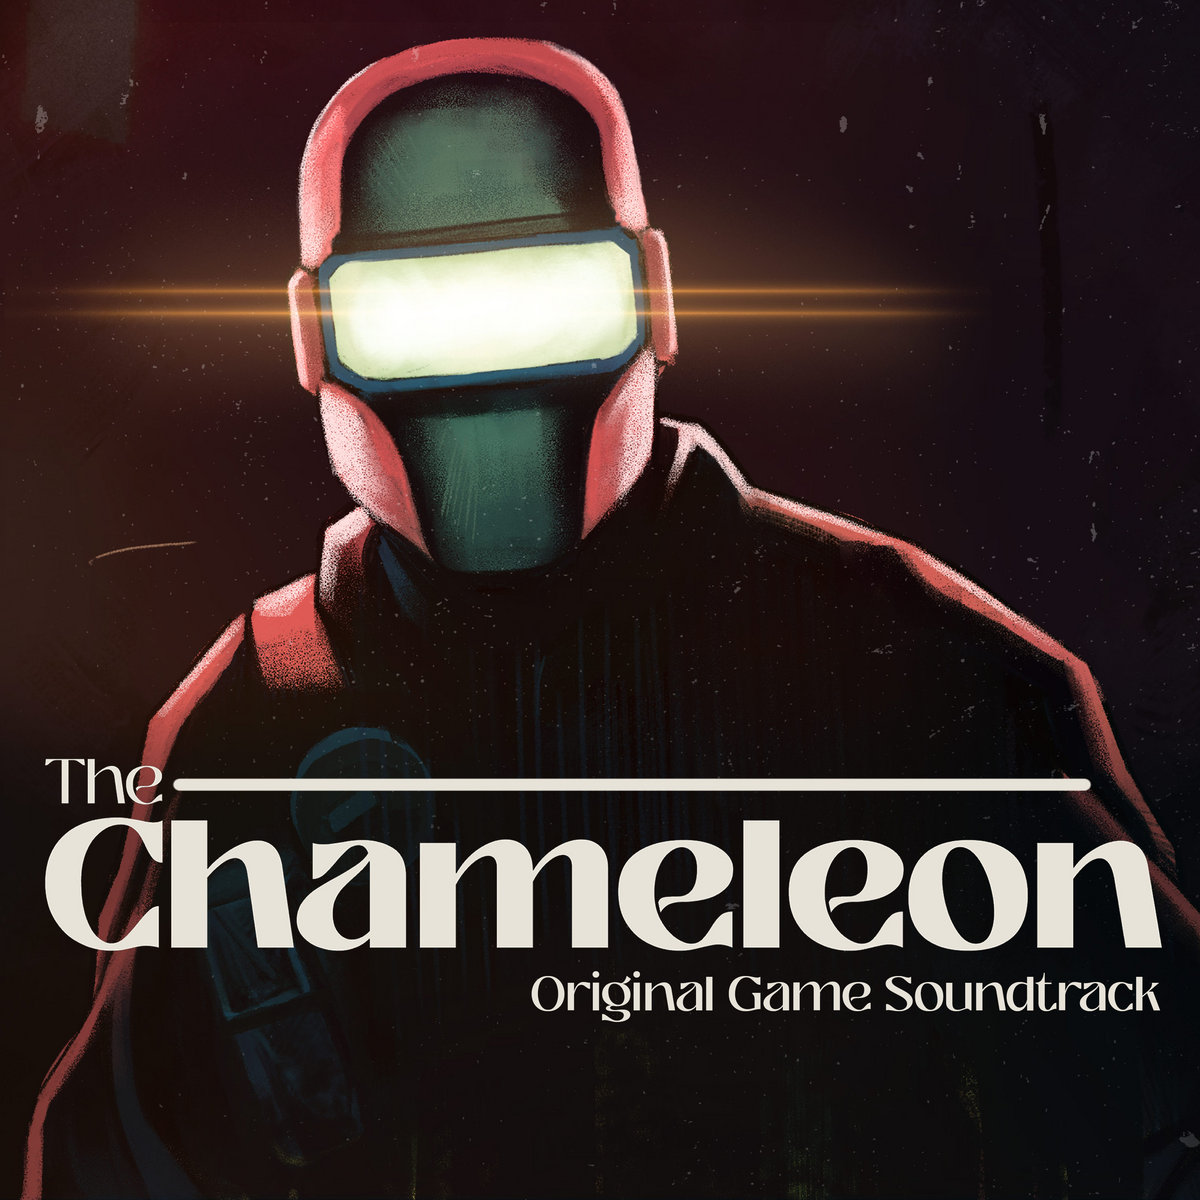 Bandcamp album cover of The Chameleon's Soundtrack by Merlino Games